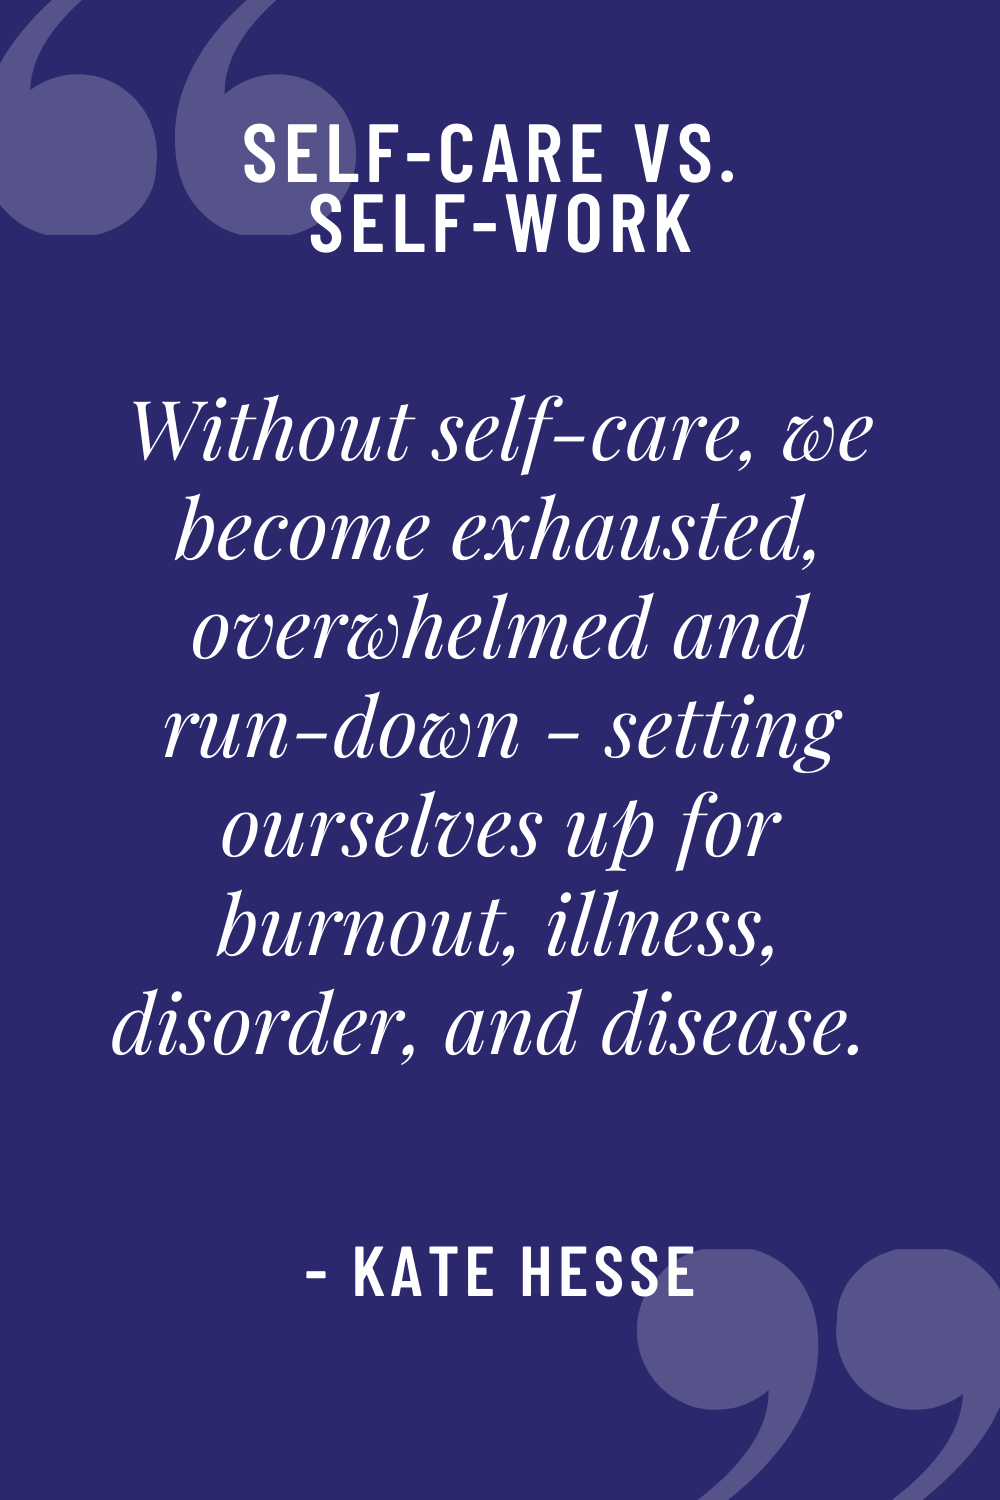 Without self-care, we become exhausted, overwhelmed, and run-down - setting ourselves up for burnout, illness, disorder, and disease.